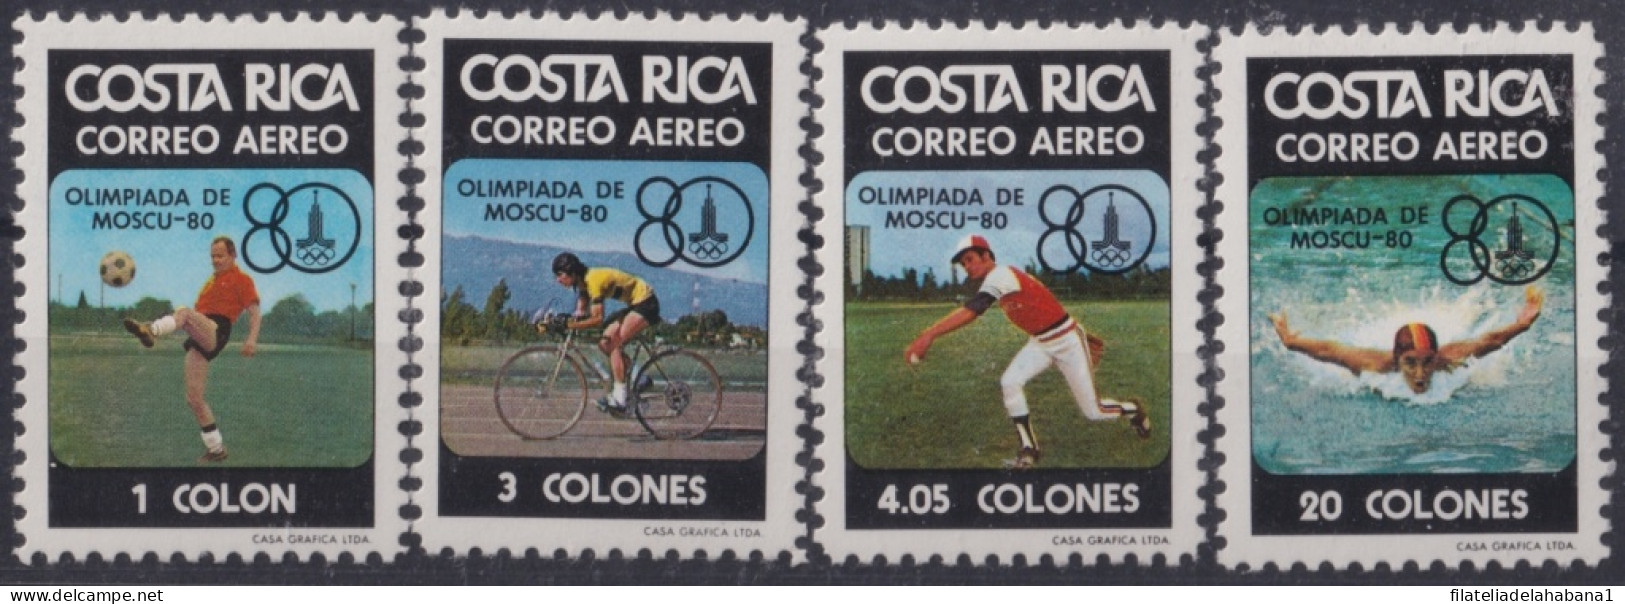 F-EX50099 COSTA RICA MNH 1980 MOSCOW OLYMPIC GAMES CICLING SOCCER BASEBALL.          - Estate 1980: Mosca